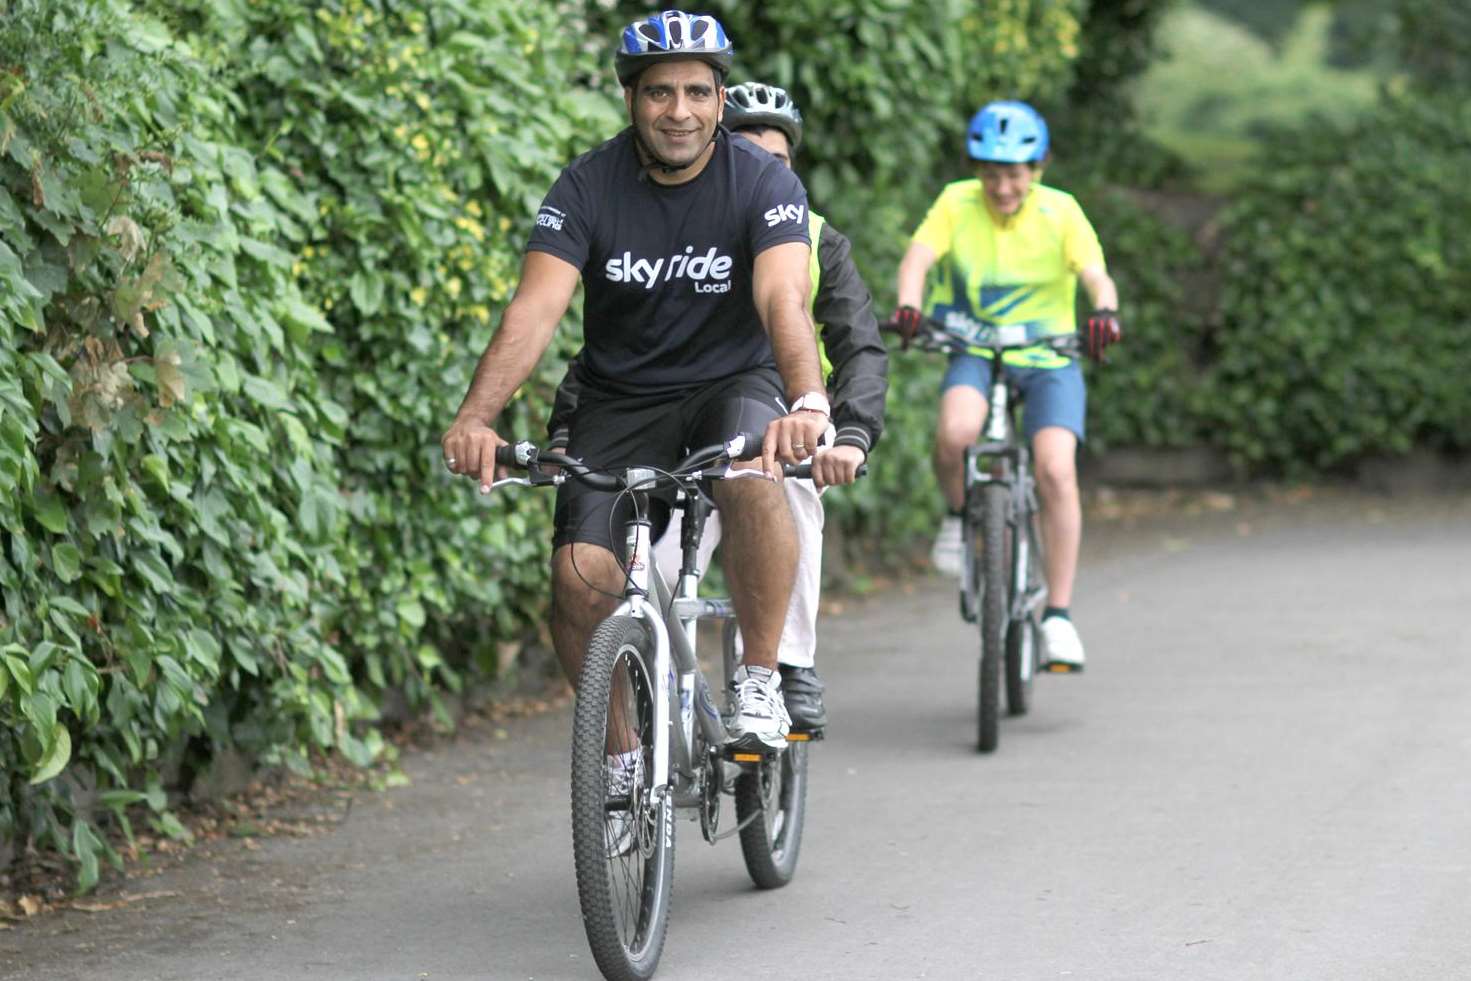 More details on all the Sky Rides at www.goskyride.com/kent